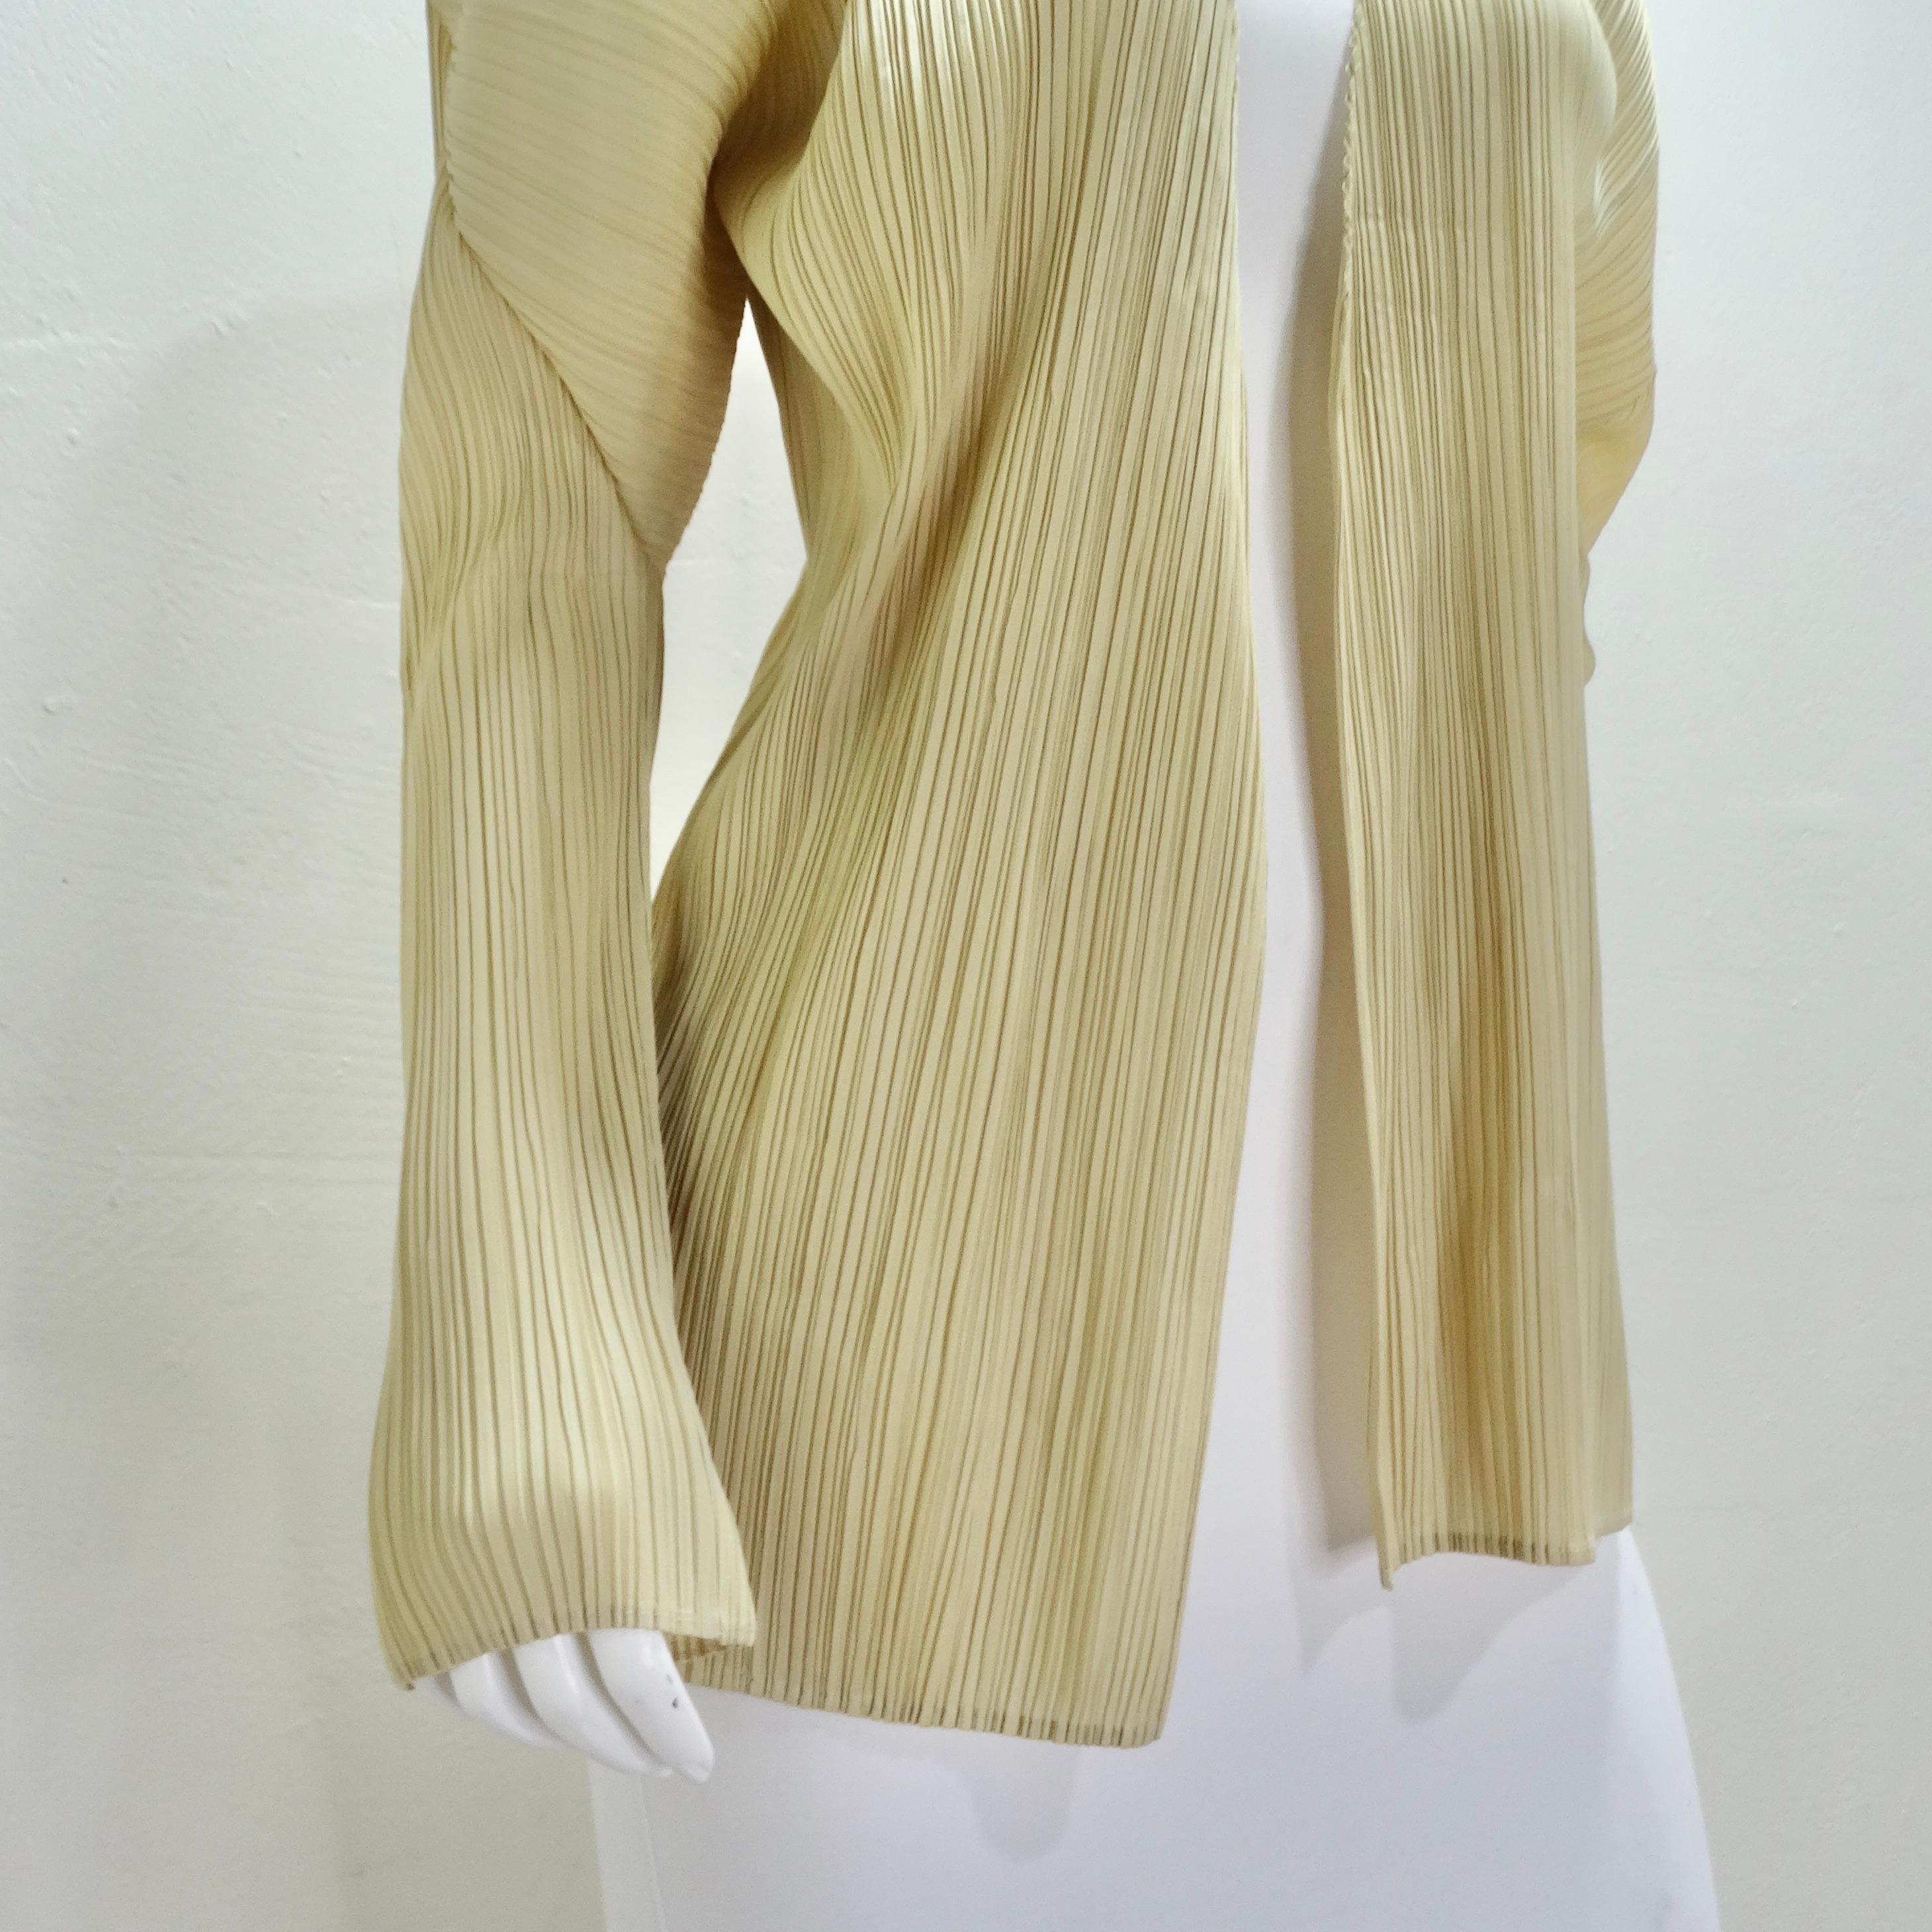 Issey Miyake 90s Pleats Please Cardigan and Shawl Set Neutral Brown In Excellent Condition For Sale In Scottsdale, AZ